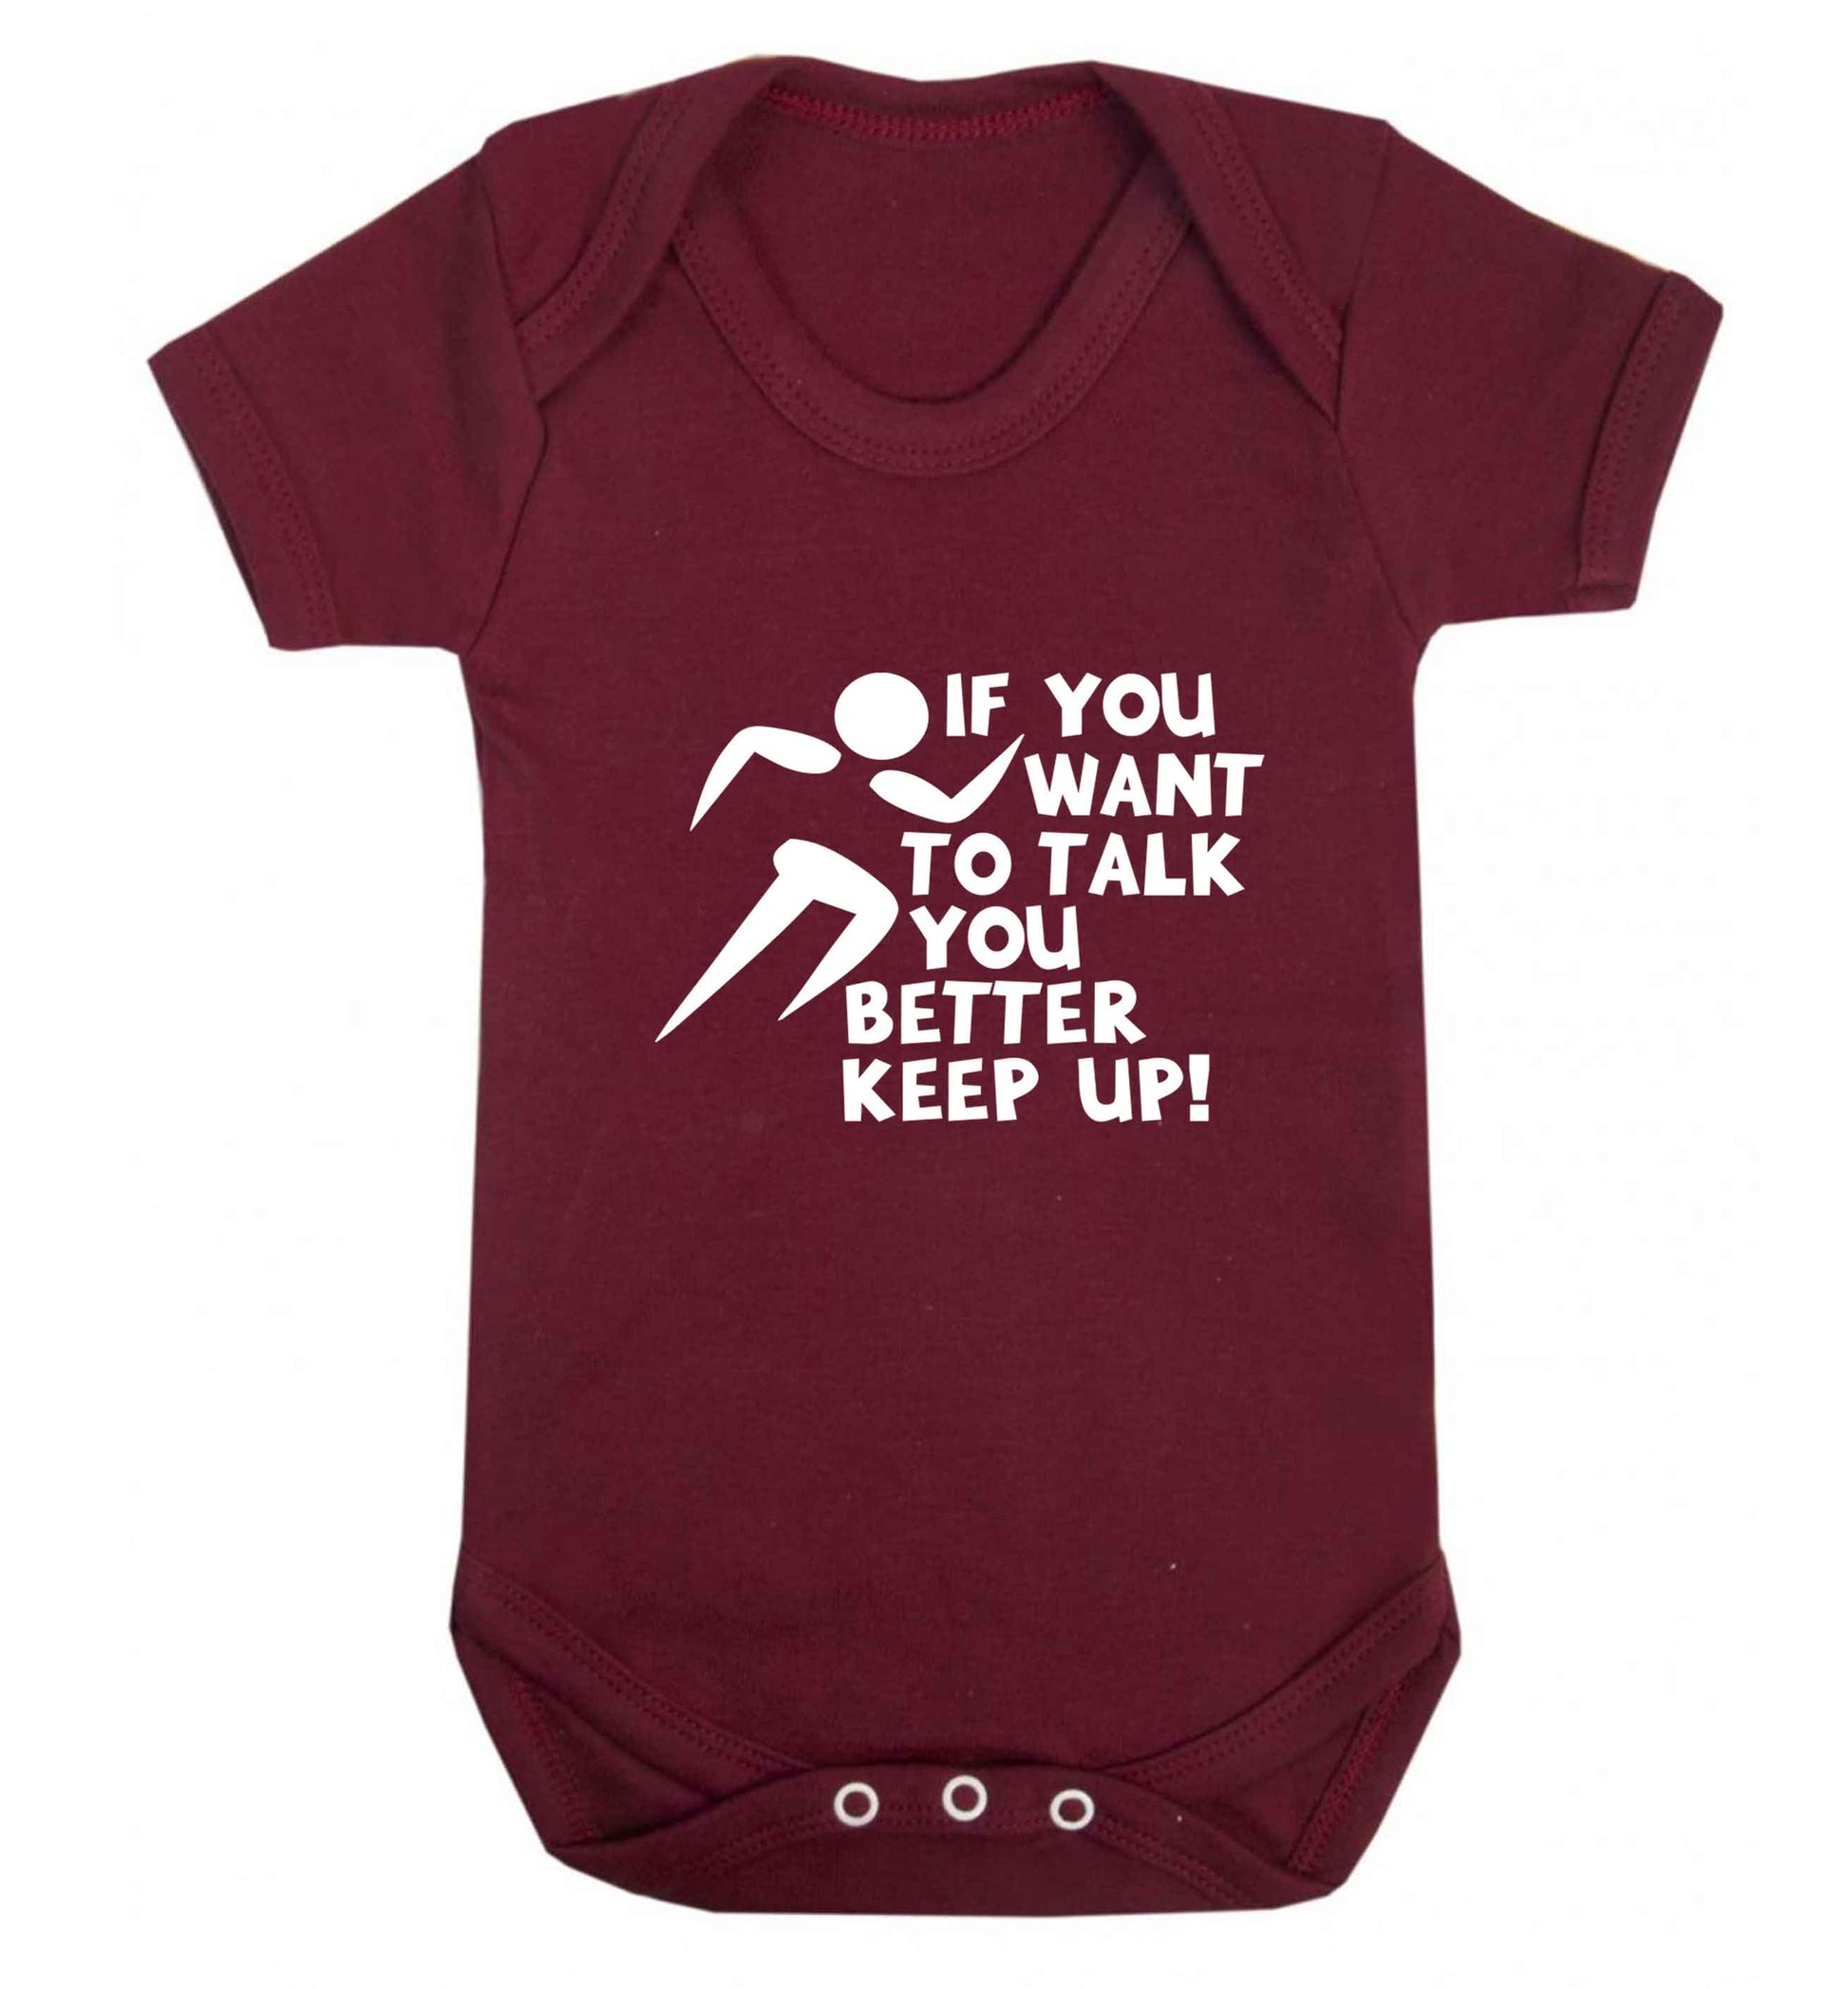 If you want to talk you better keep up! baby vest maroon 18-24 months